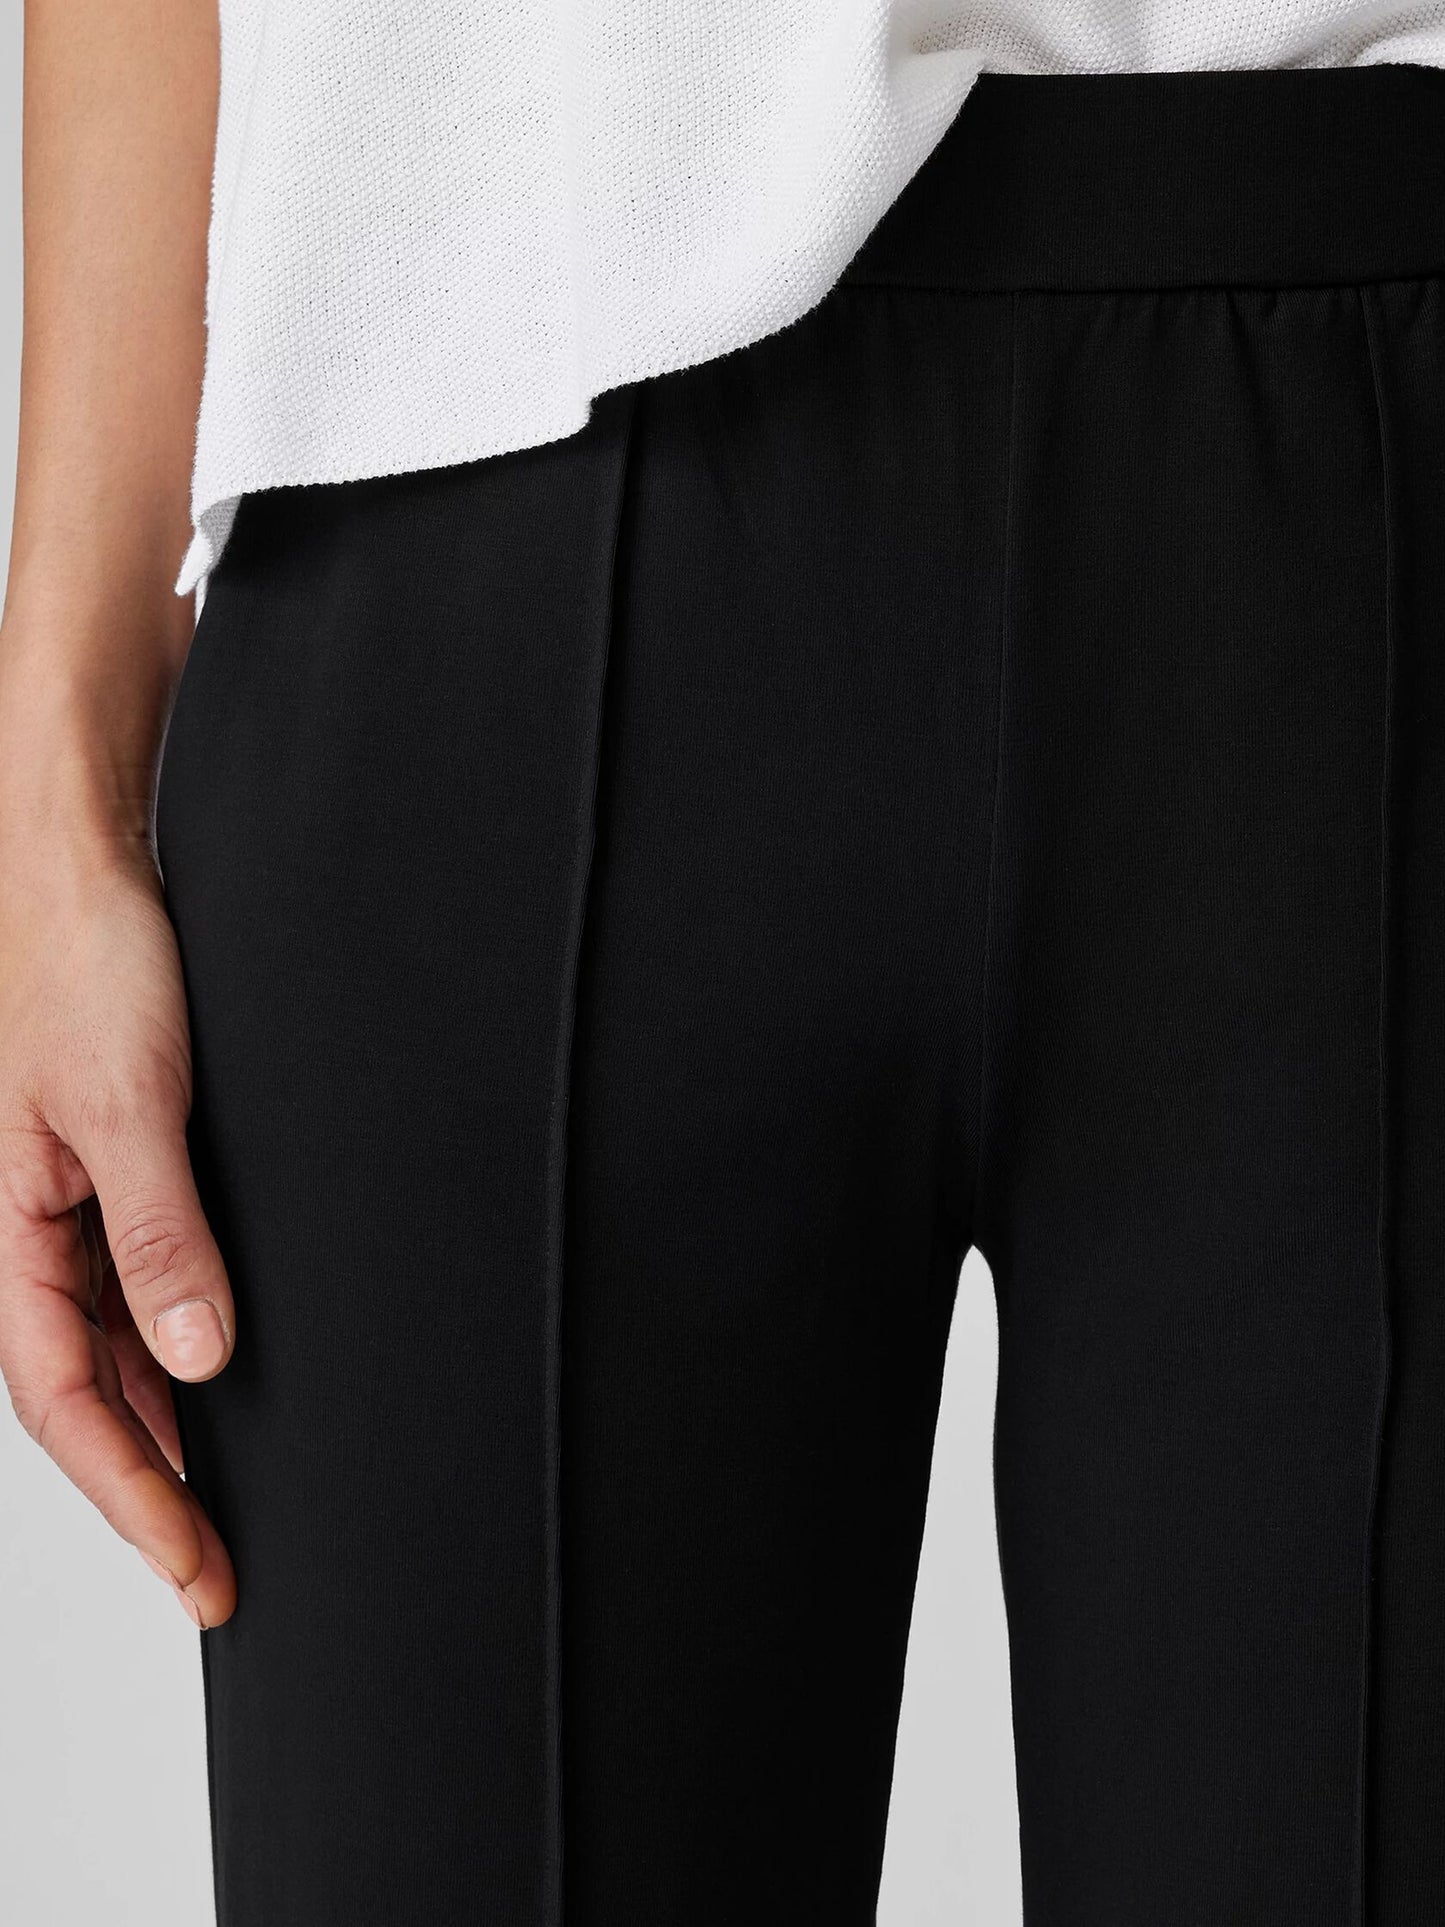 Eileen Fisher Pima Cotton Stretch Pintuck Pant